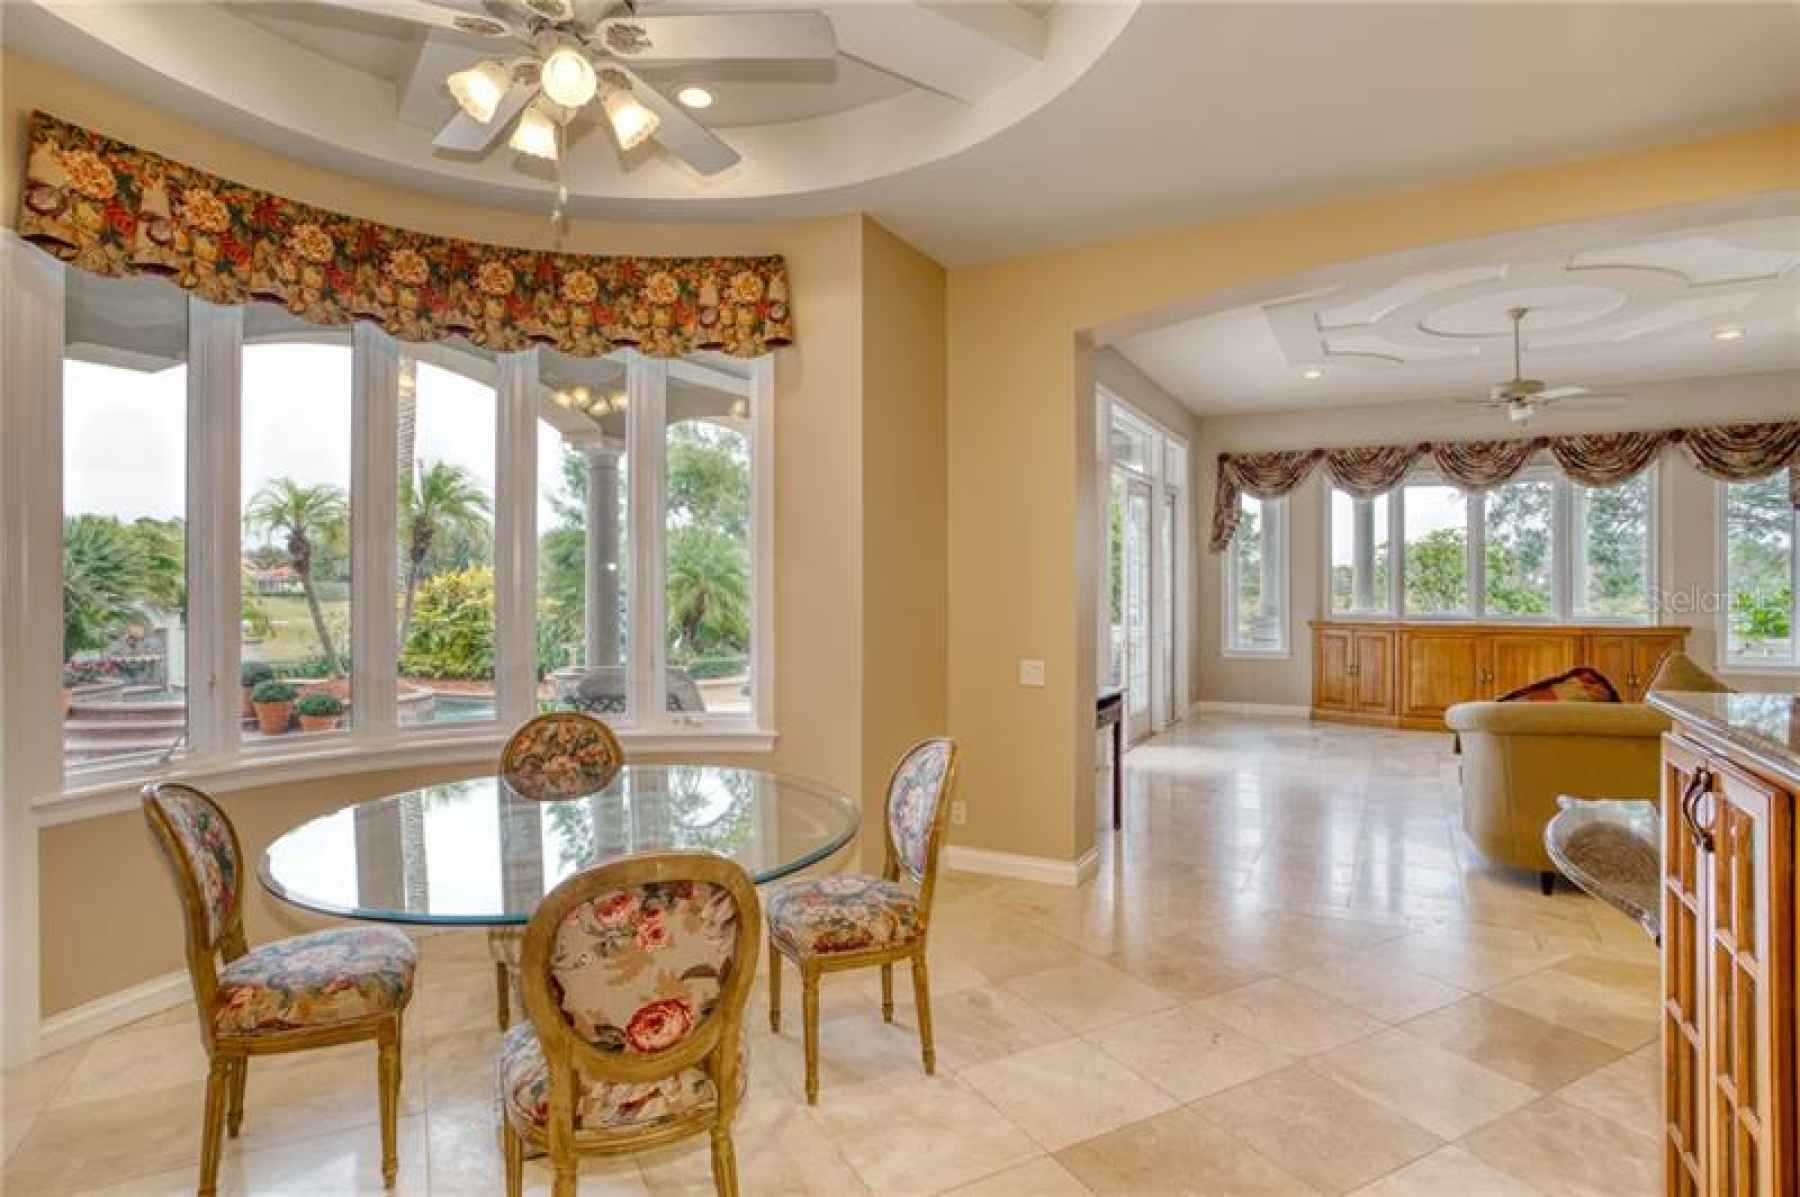 Breakfast Room overlooking pool and golf course